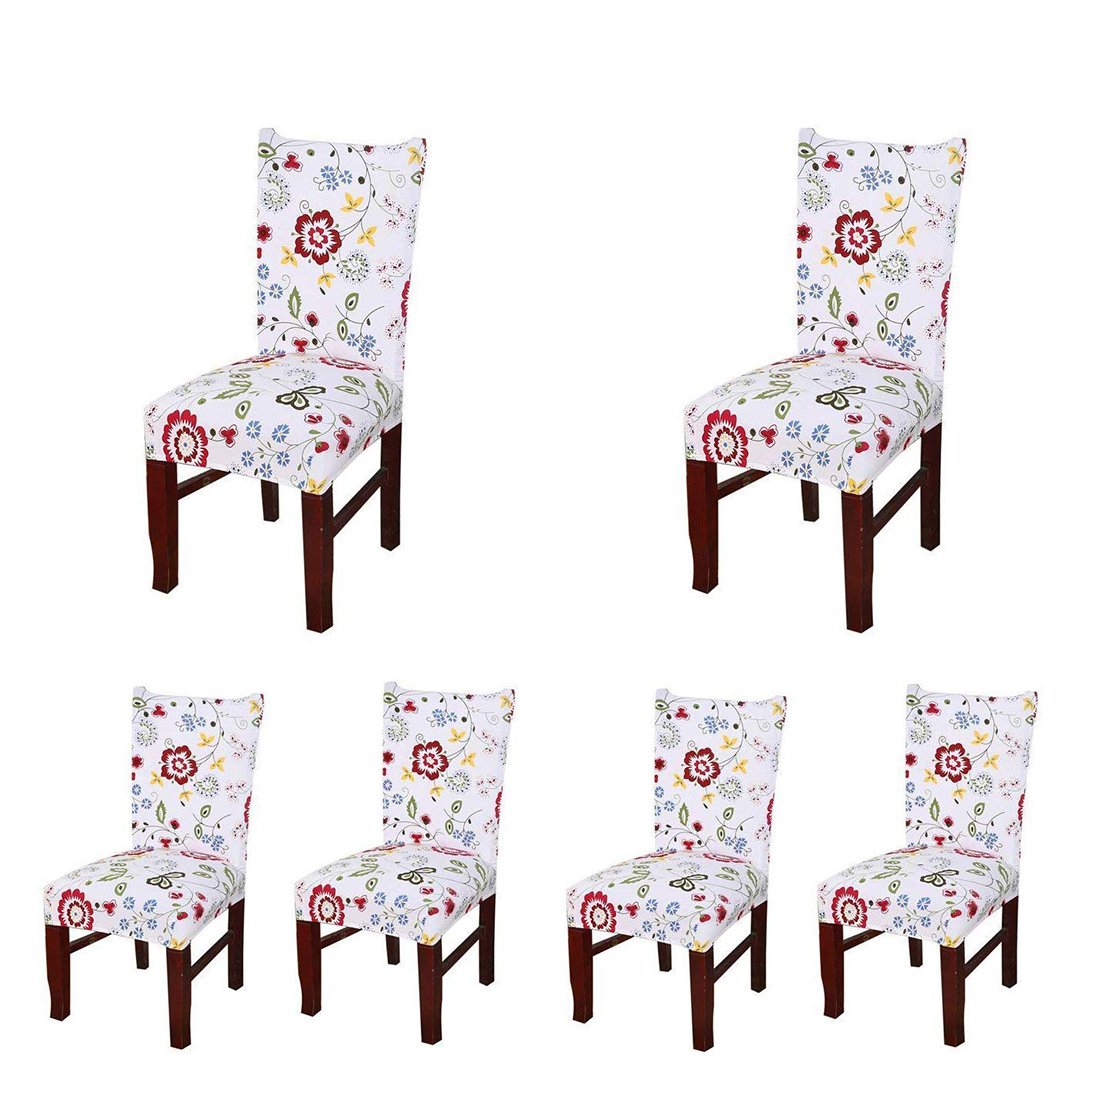 Printed Elastic Chair Cover - White Red Flower